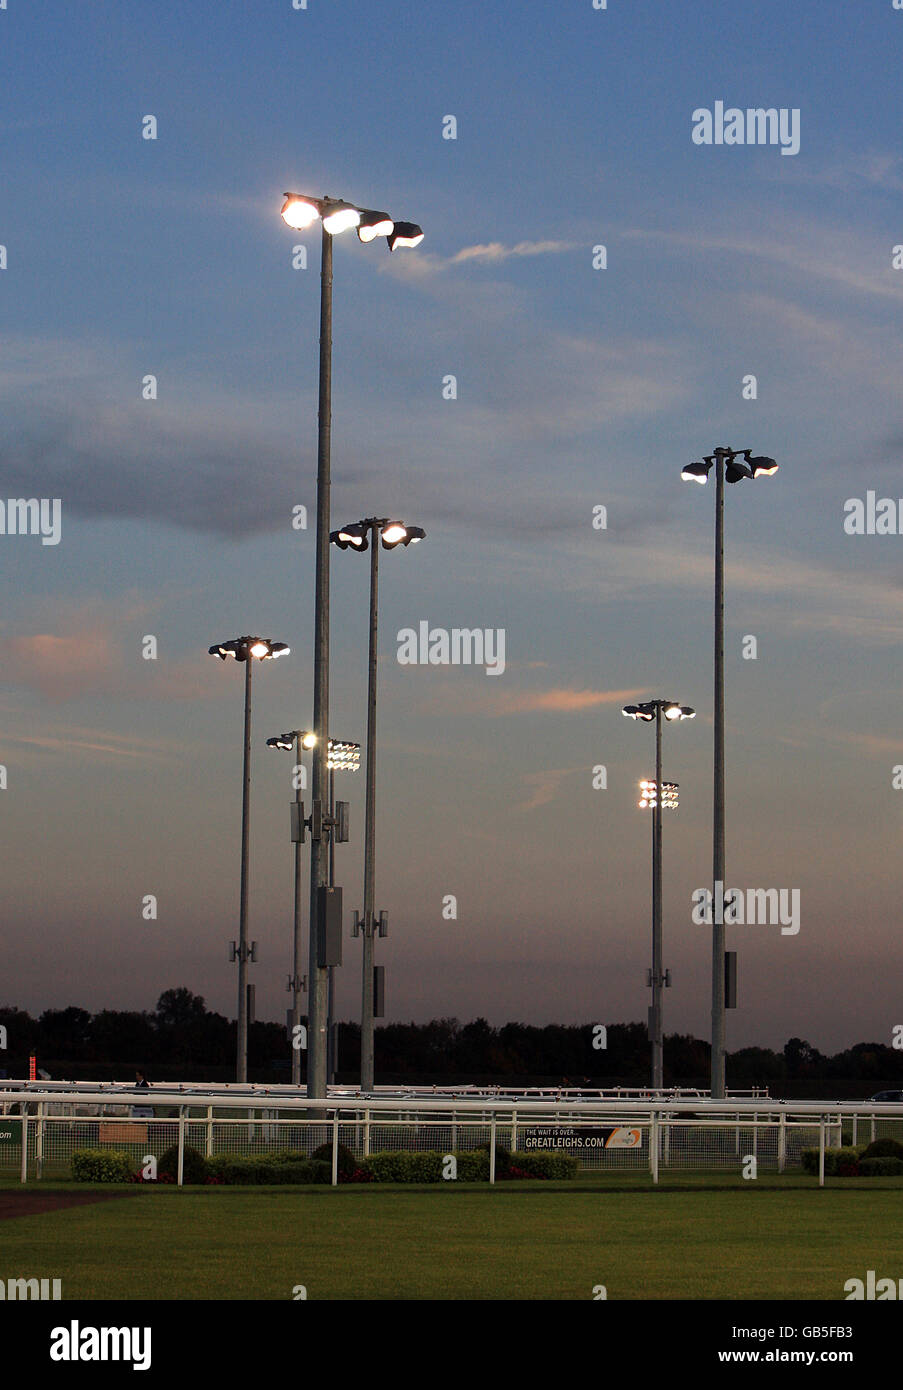 General view of Great Leighs Racecourse under floodlights Stock Photo